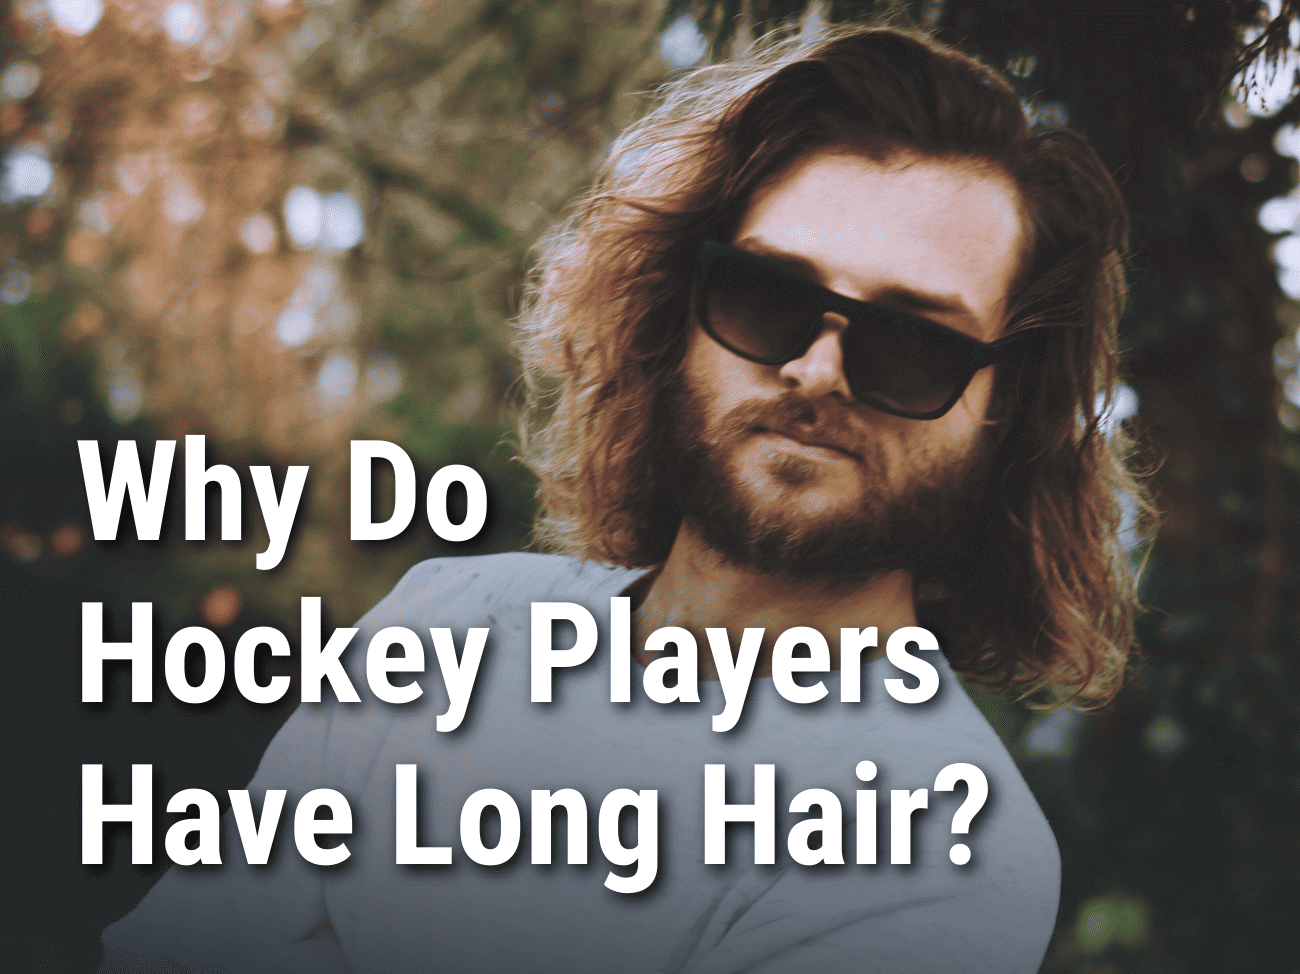 Why do hockey players have long hair? Man with long hair.